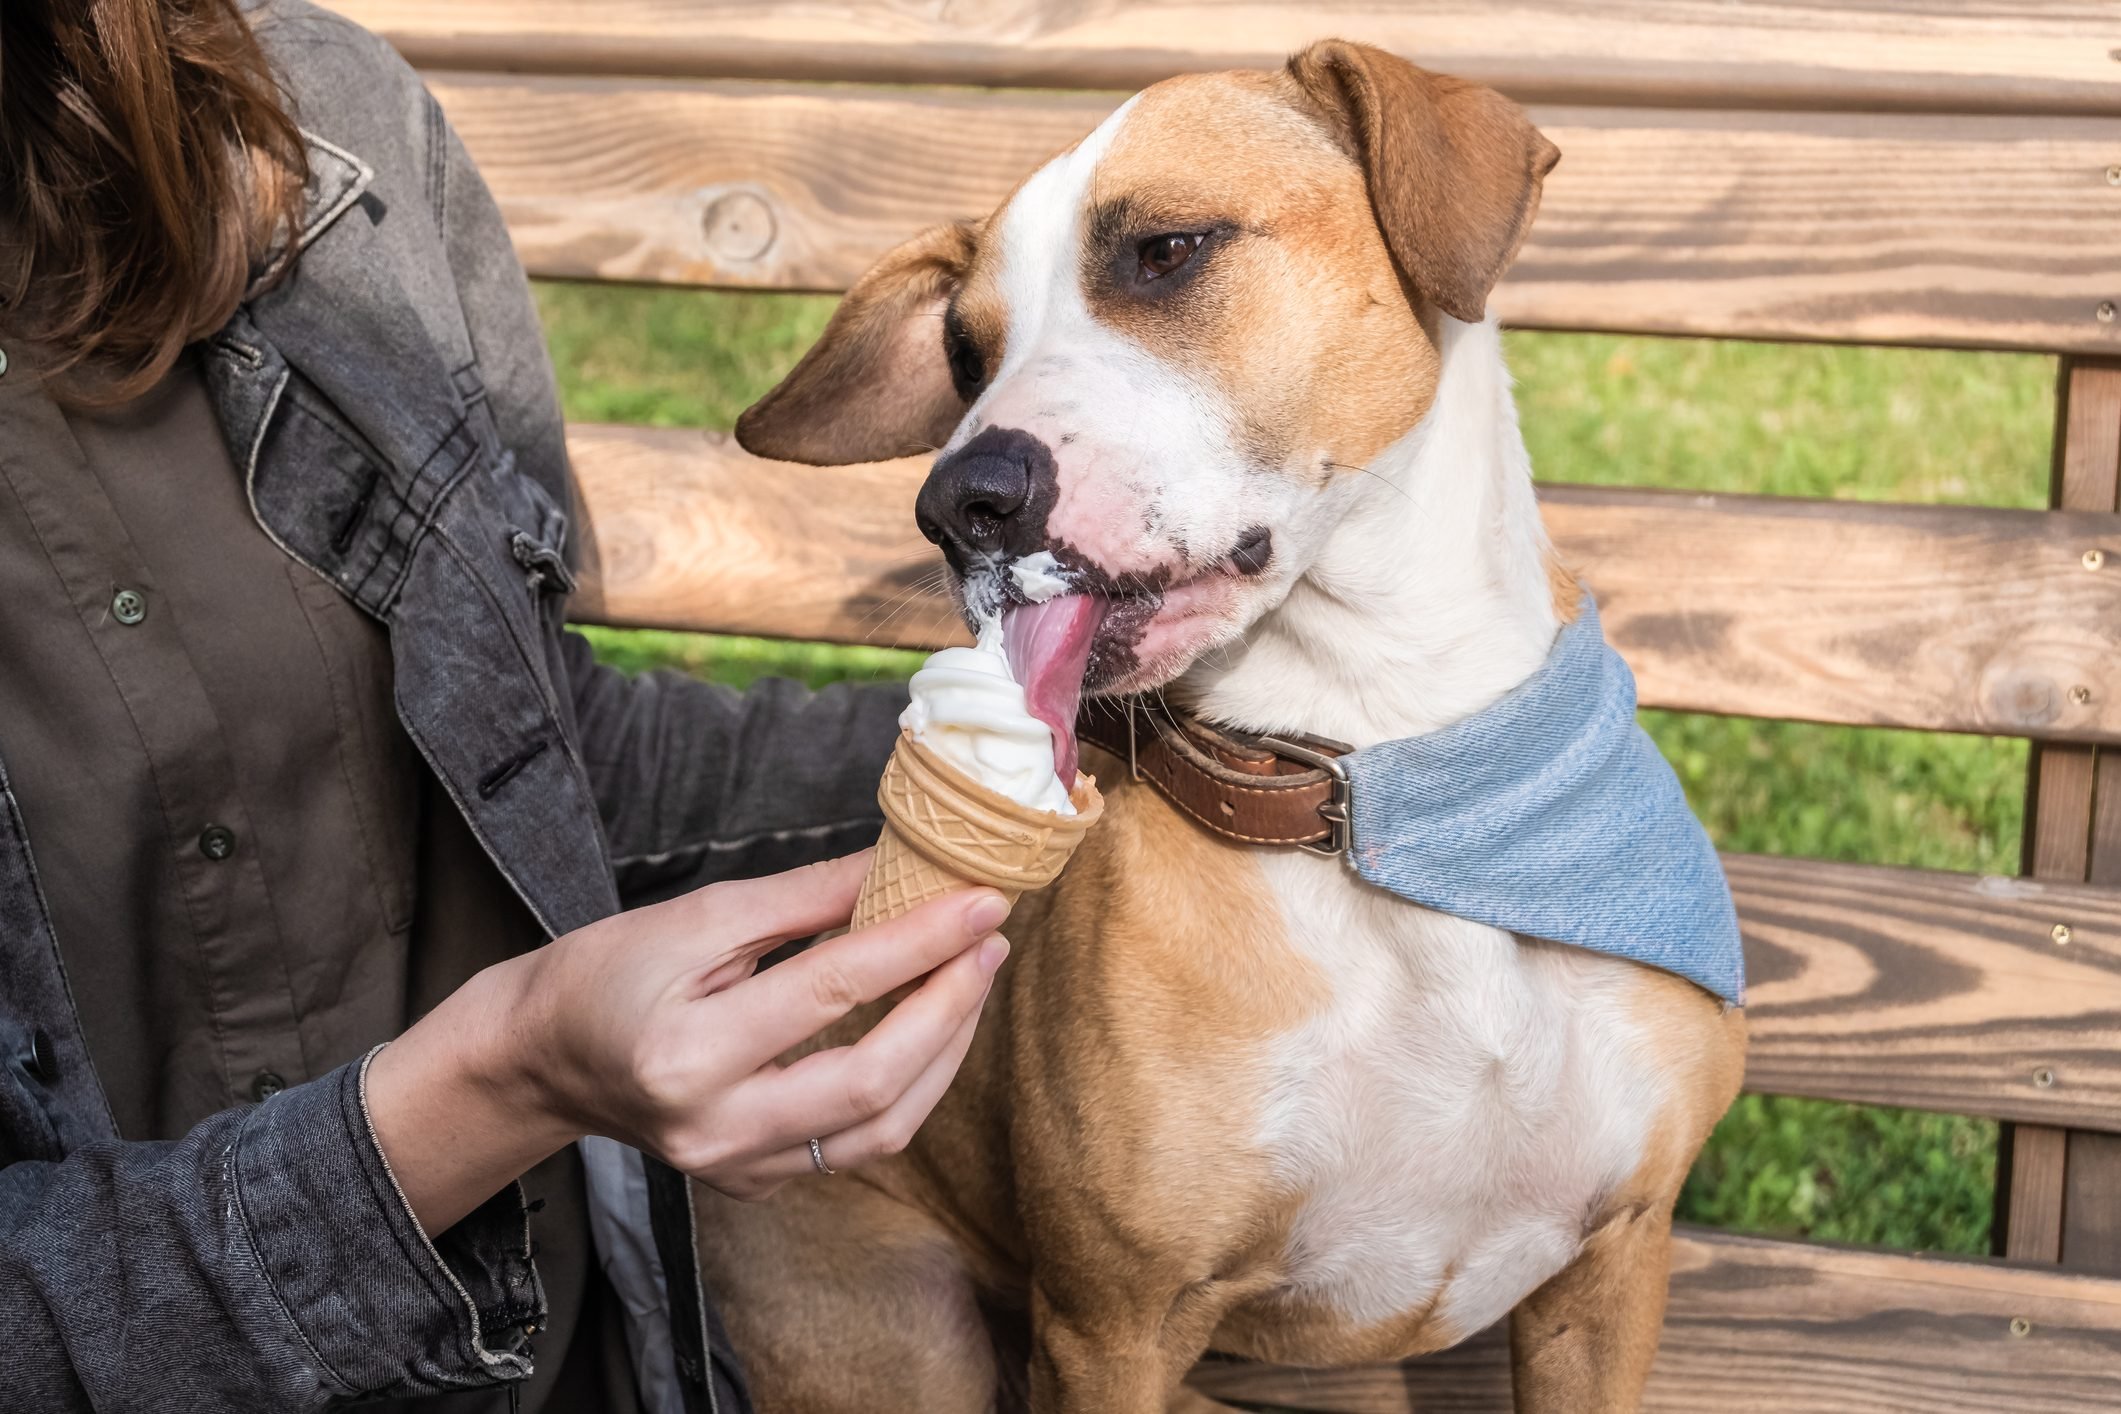 Can Dogs Eat Ice Cream? Here's What the Experts Say